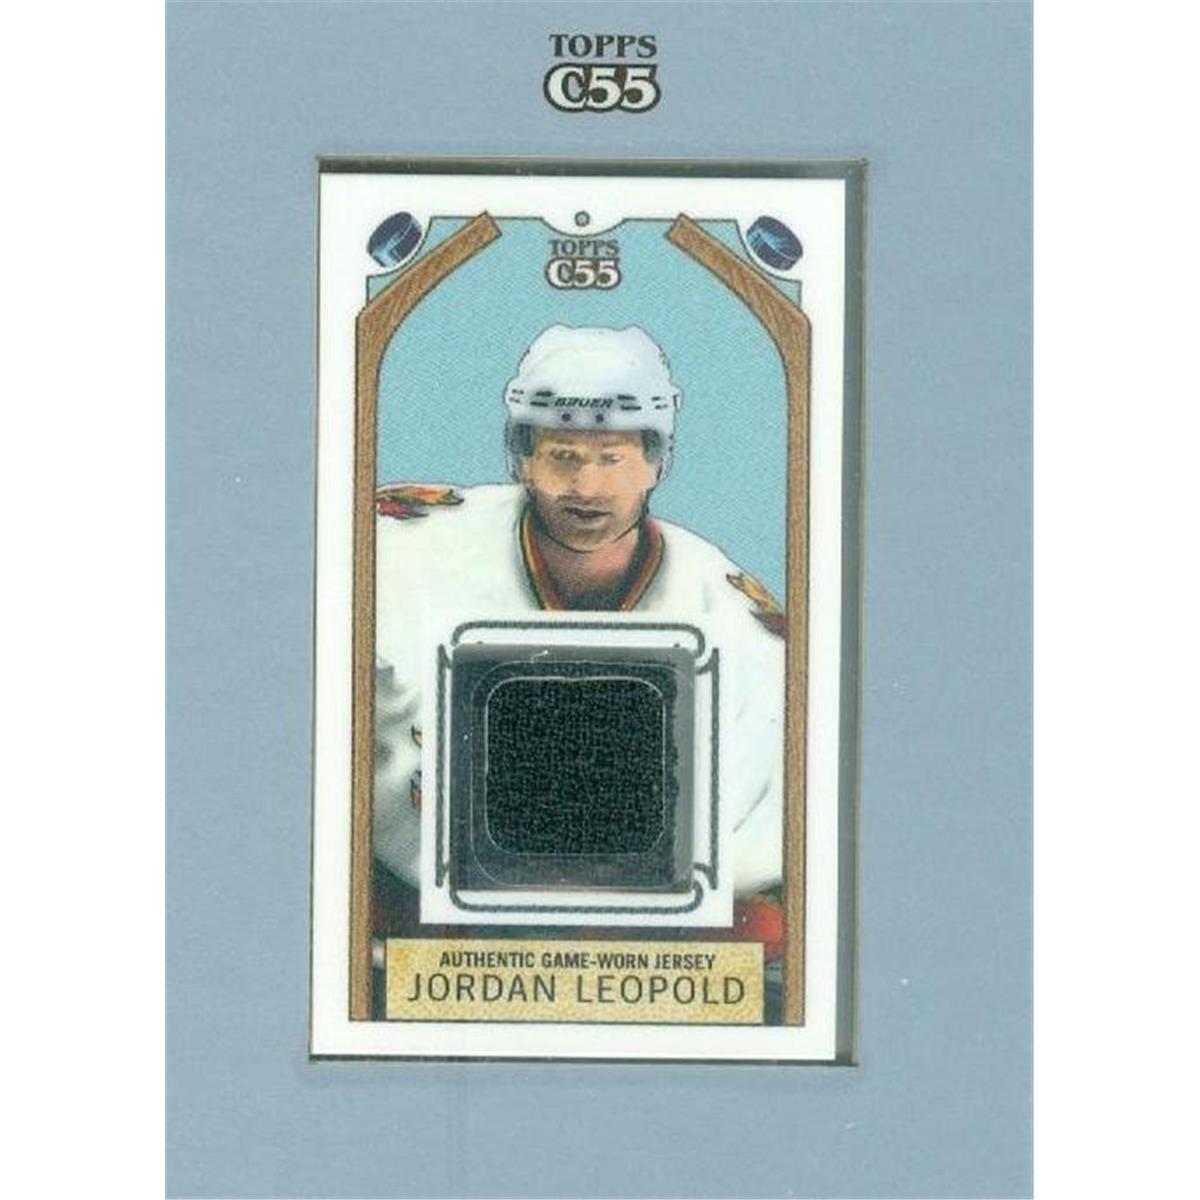 Picture of Autograph Warehouse 466241 Jordan Leopold Player Worn Jersey Patch Hockey Card&#44; 2003 Topps C55 No. TRJL